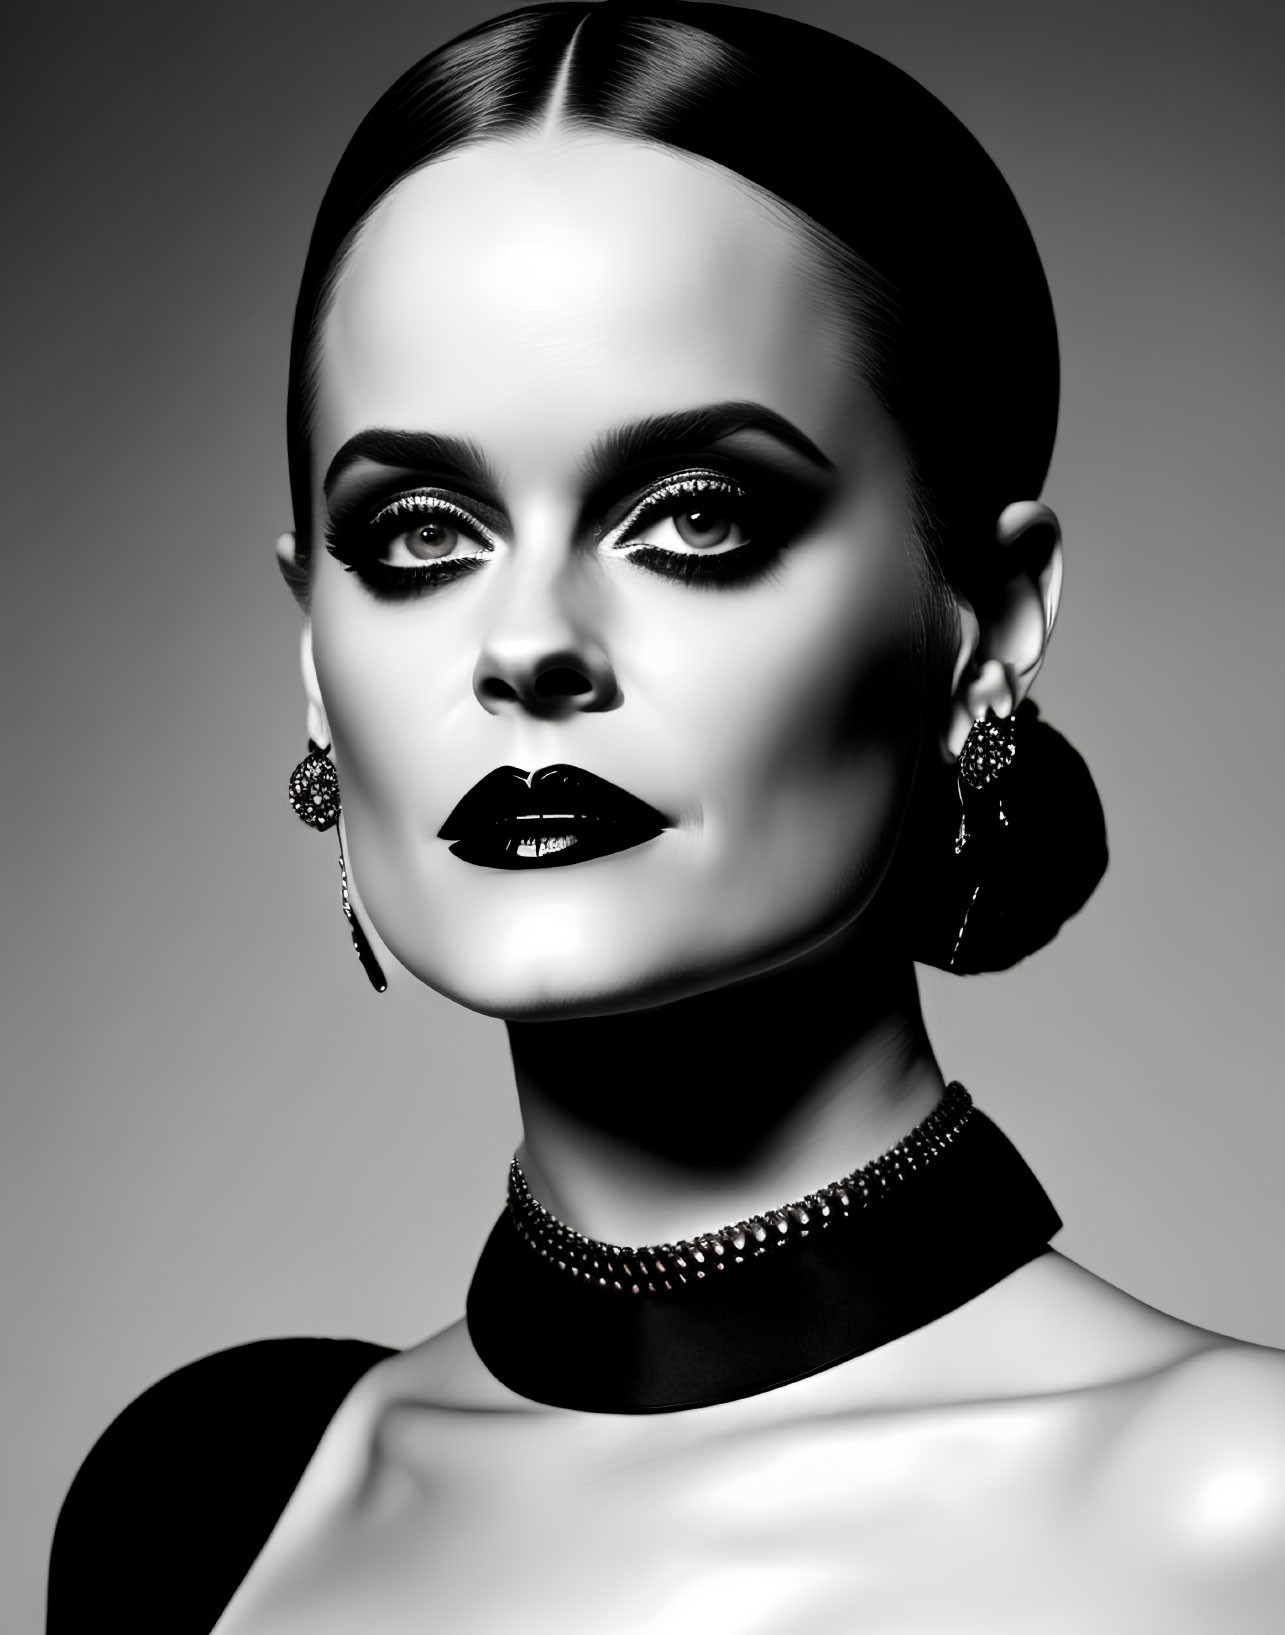 Monochrome portrait of woman with bold makeup and elegant jewelry